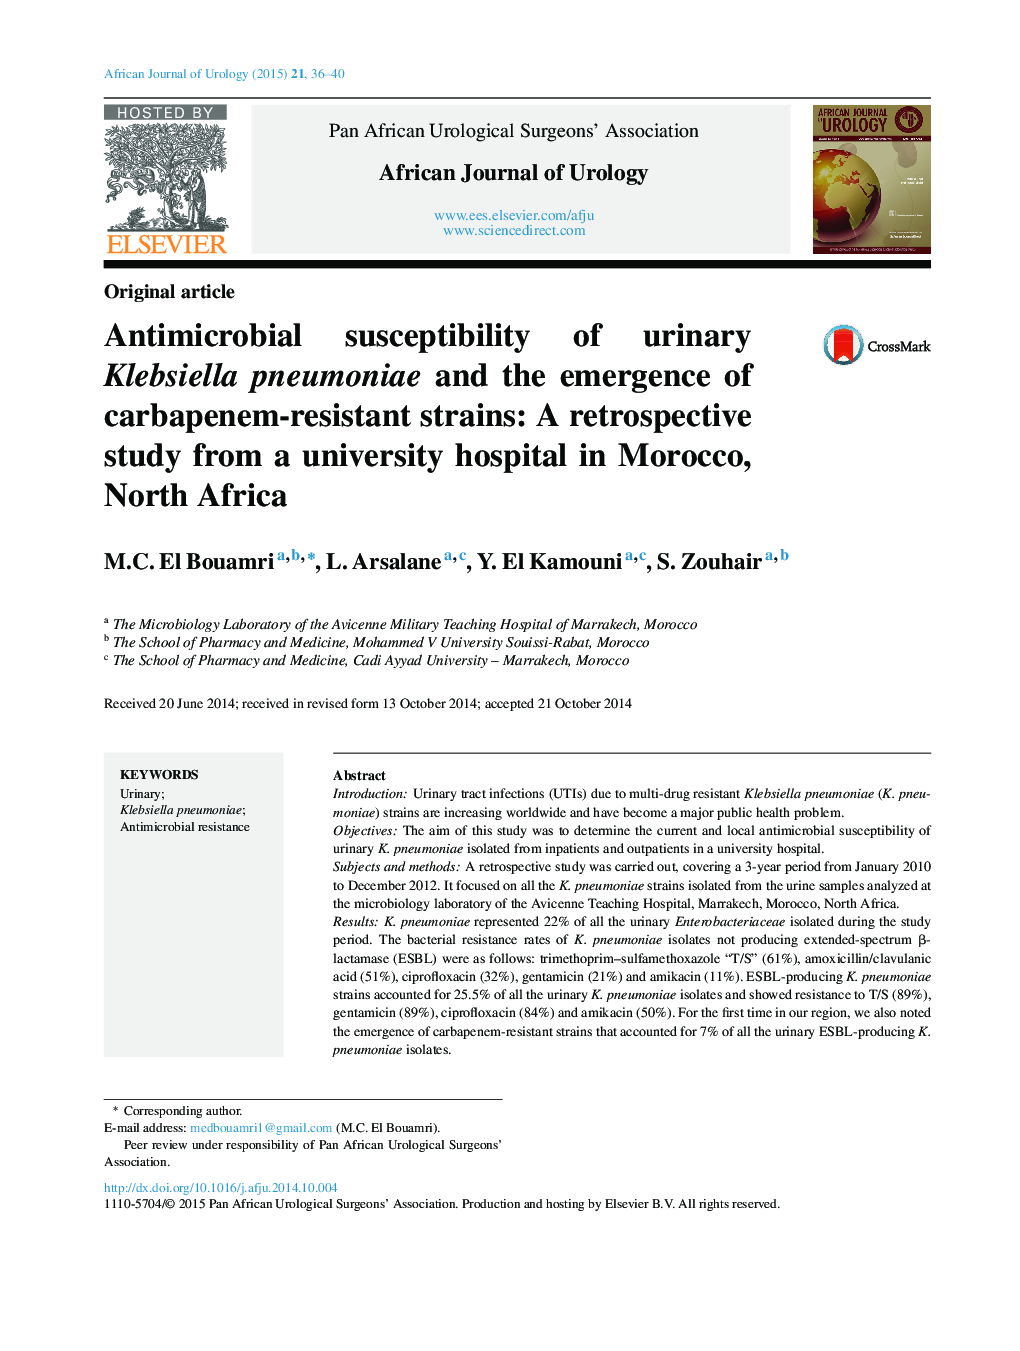 Antimicrobial susceptibility of urinary Klebsiella pneumoniae and the emergence of carbapenem-resistant strains: A retrospective study from a university hospital in Morocco, North Africa 